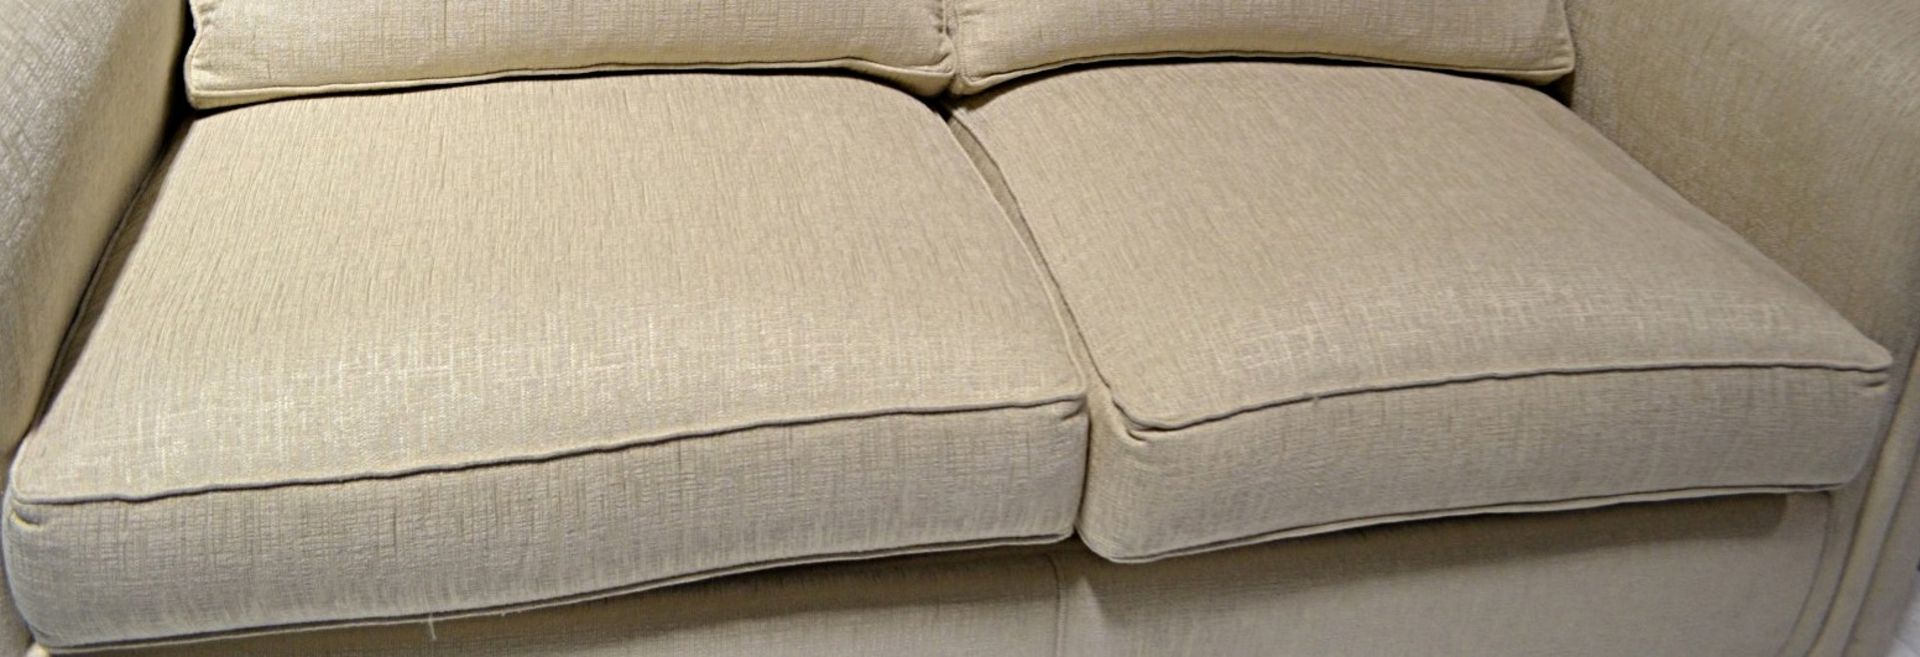 1 x DURESTA Waldorf Zephyr Sofabed With Mattress - Stunning Example In Excellent Condition - Fully - Image 7 of 14